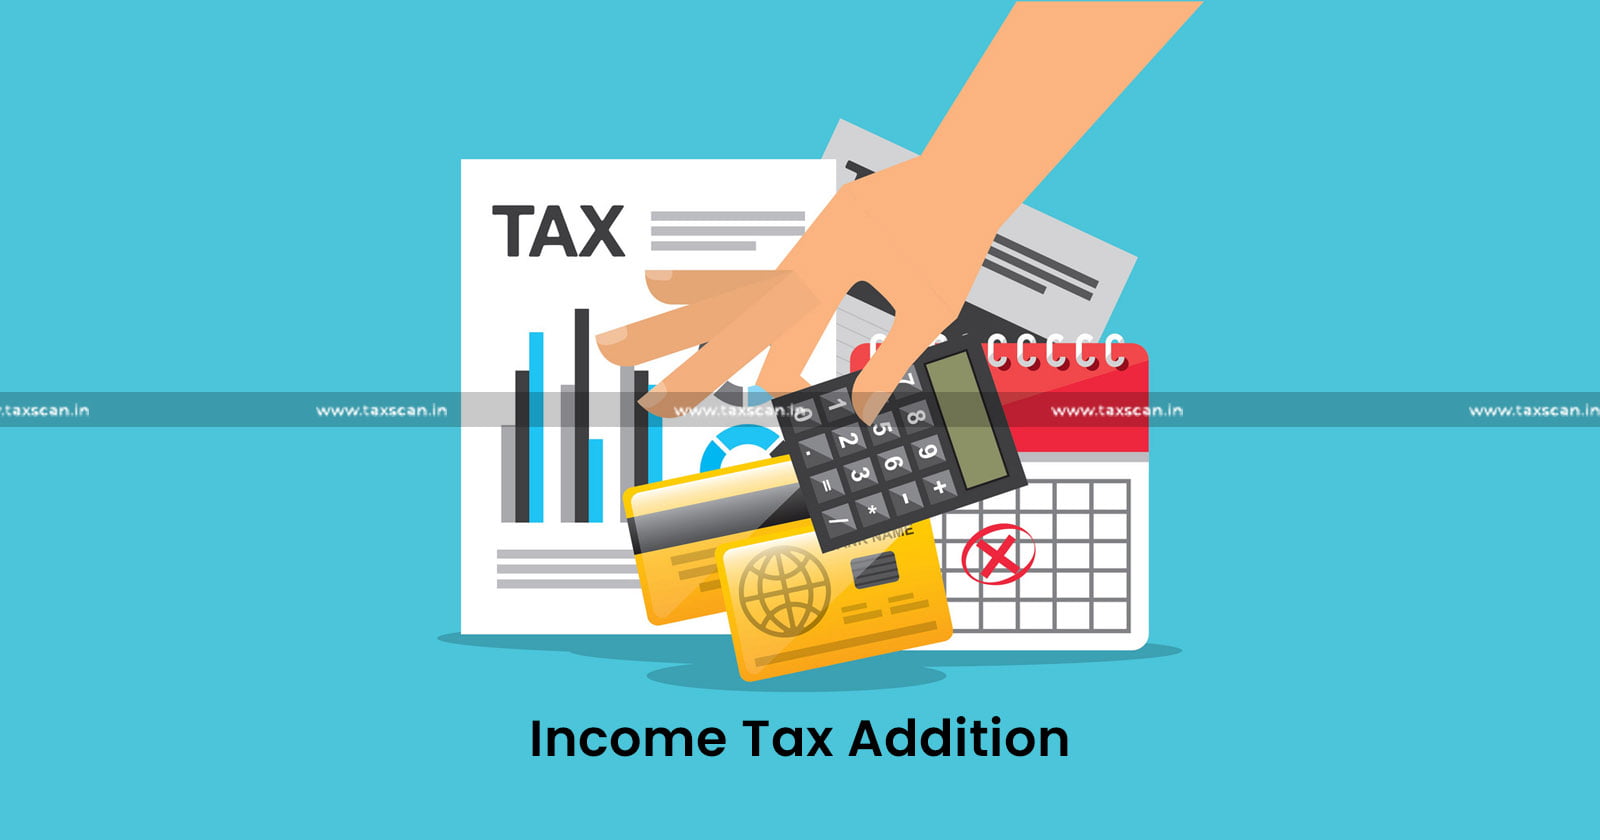 Trigger Reassessment - Reassessment - AO - Assessing Officer - Pending Appeal - Income Tax Addition - Income Tax - Delhi High Court - TAXSCAN